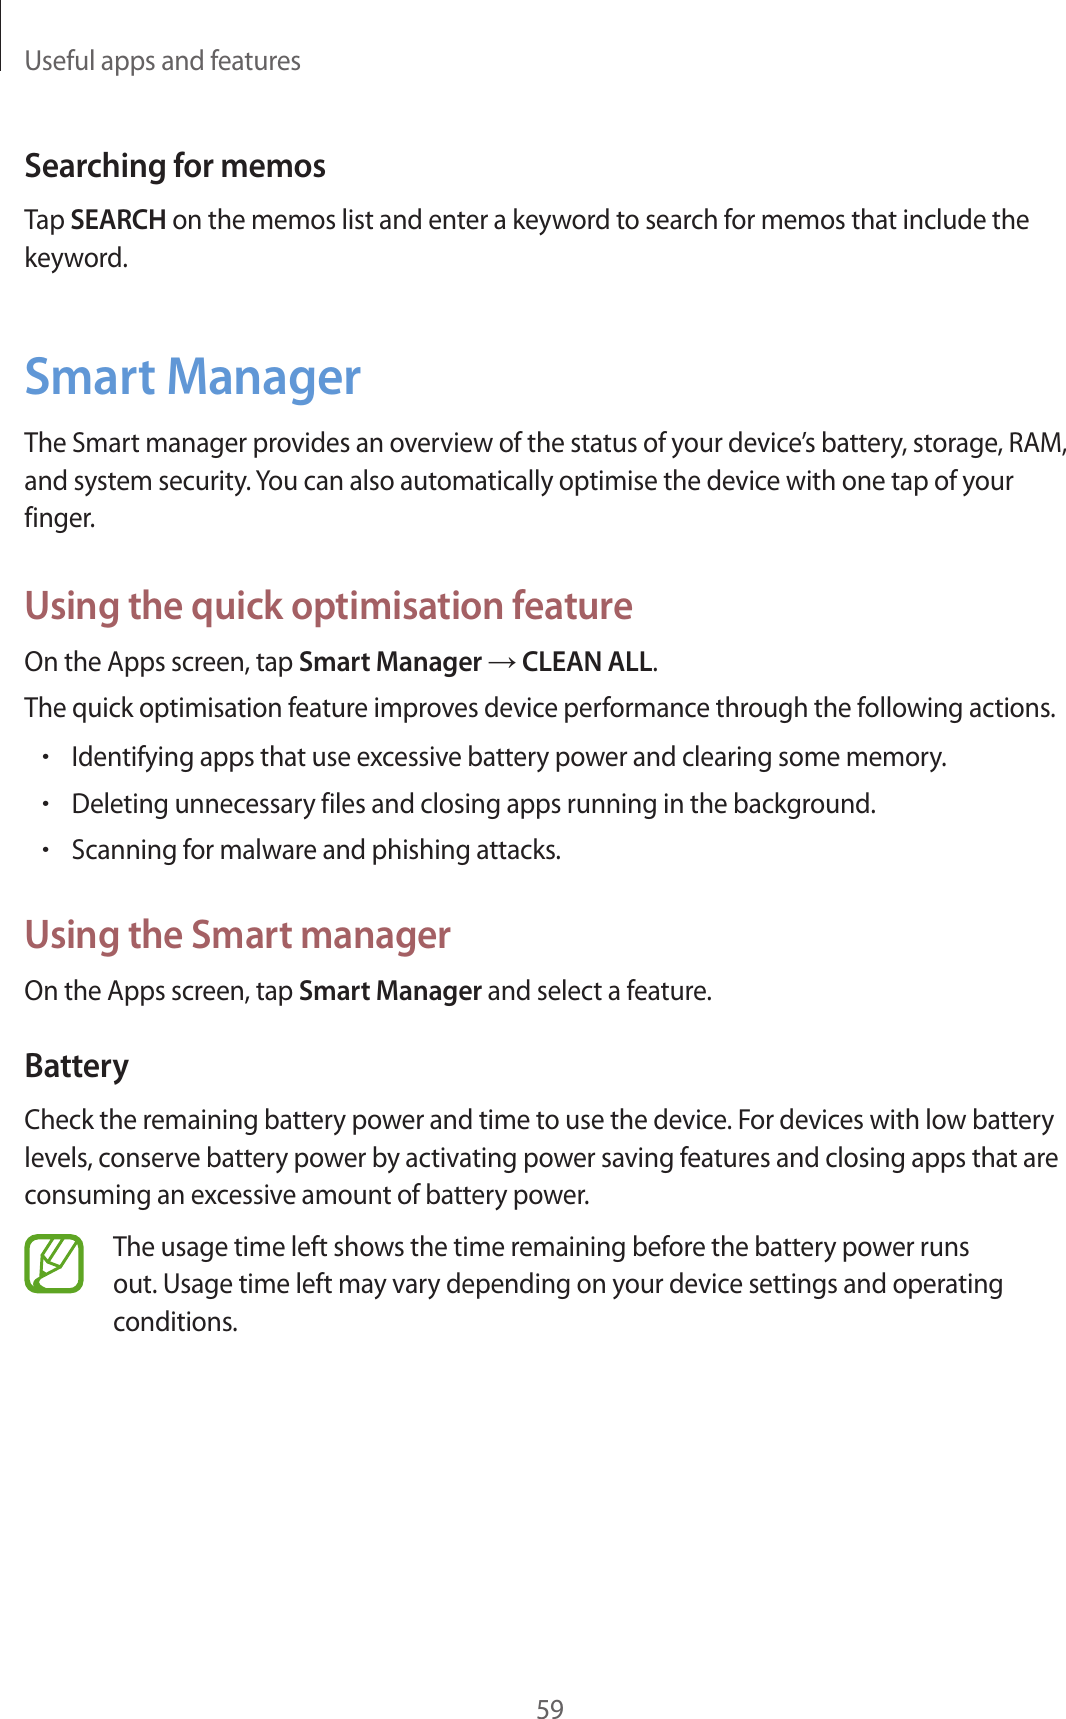 Useful apps and features59Searching for memosTap SEARCH on the memos list and enter a keyword to search for memos that include the keyword.Smart ManagerThe Smart manager provides an overview of the status of your device’s battery, storage, RAM, and system security. You can also automatically optimise the device with one tap of your finger.Using the quick optimisation featureOn the Apps screen, tap Smart Manager → CLEAN ALL.The quick optimisation feature improves device performance through the following actions.•Identifying apps that use excessive battery power and clearing some memory.•Deleting unnecessary files and closing apps running in the background.•Scanning for malware and phishing attacks.Using the Smart managerOn the Apps screen, tap Smart Manager and select a feature.BatteryCheck the remaining battery power and time to use the device. For devices with low battery levels, conserve battery power by activating power saving features and closing apps that are consuming an excessive amount of battery power.The usage time left shows the time remaining before the battery power runs out. Usage time left may vary depending on your device settings and operating conditions.